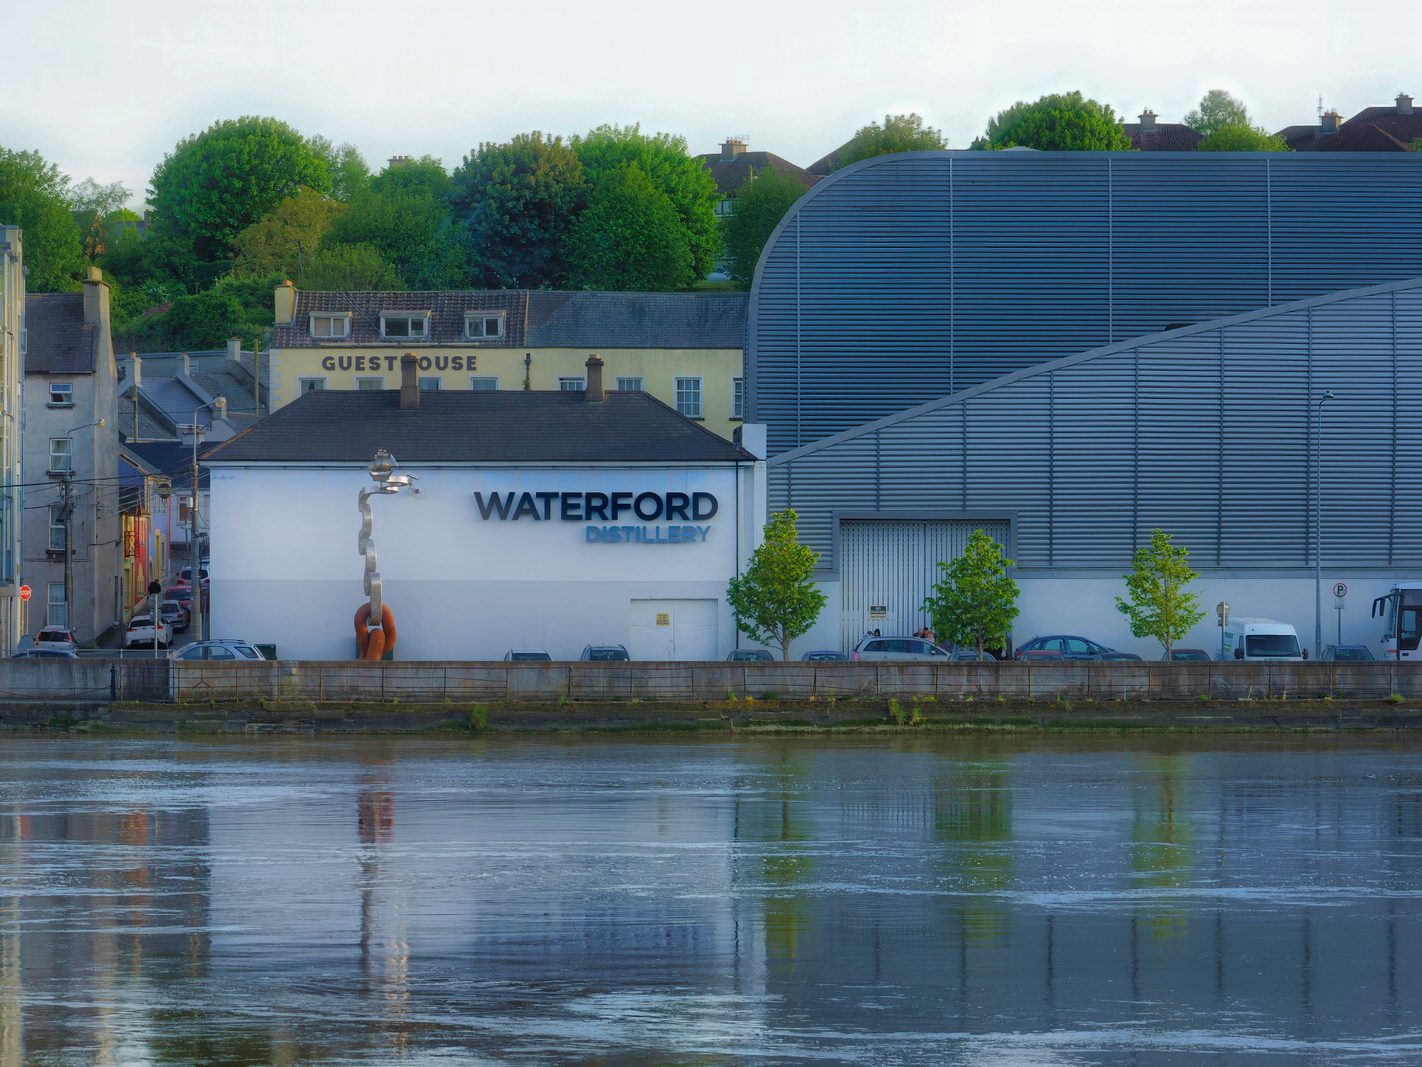 WATERFORD DISTILLERY PHOTOGRAPHED MAY 2016 PRODUCTION BEGAN IN JANUARY 010